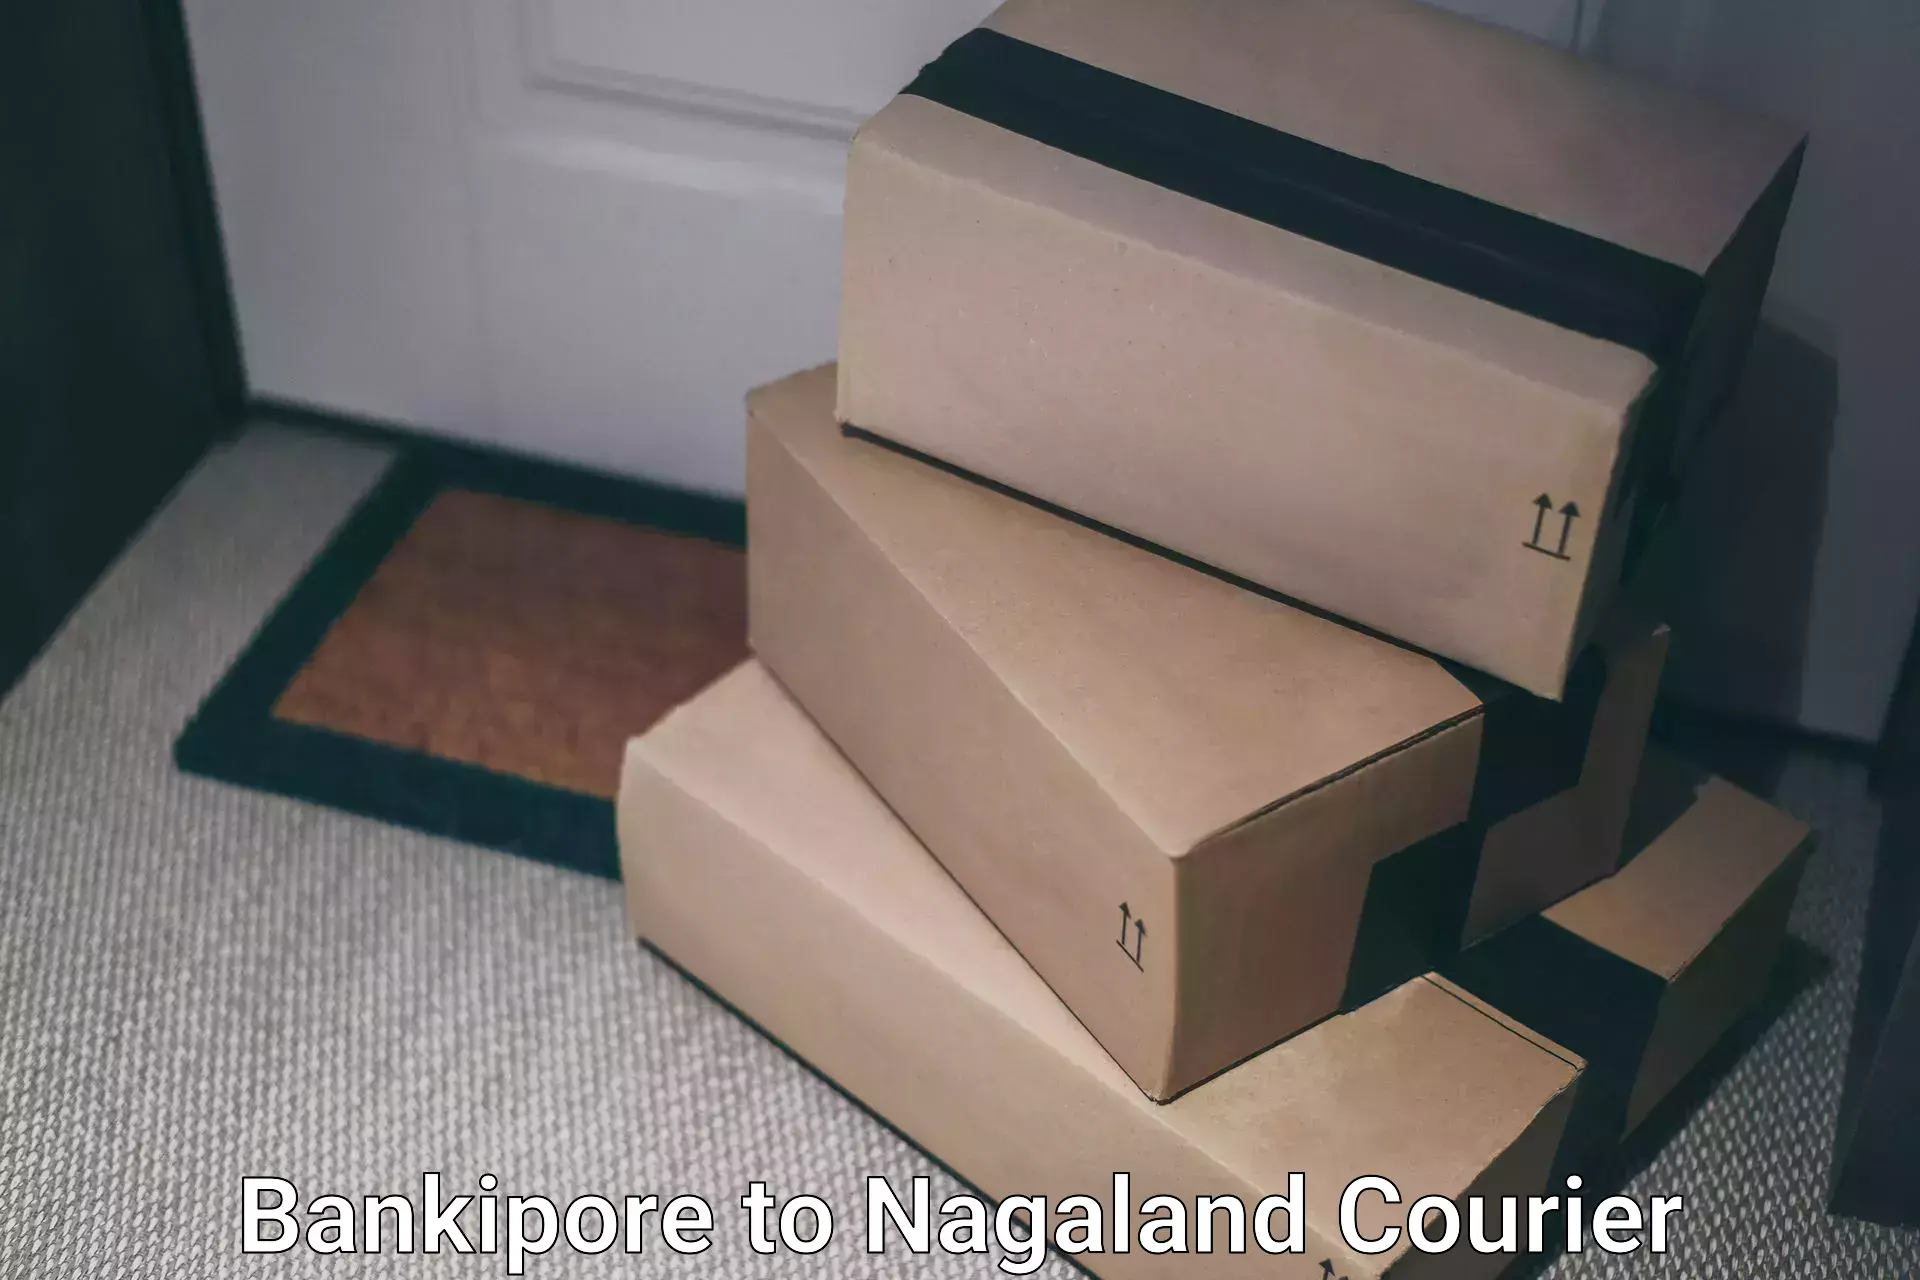 Parcel delivery automation Bankipore to Nagaland